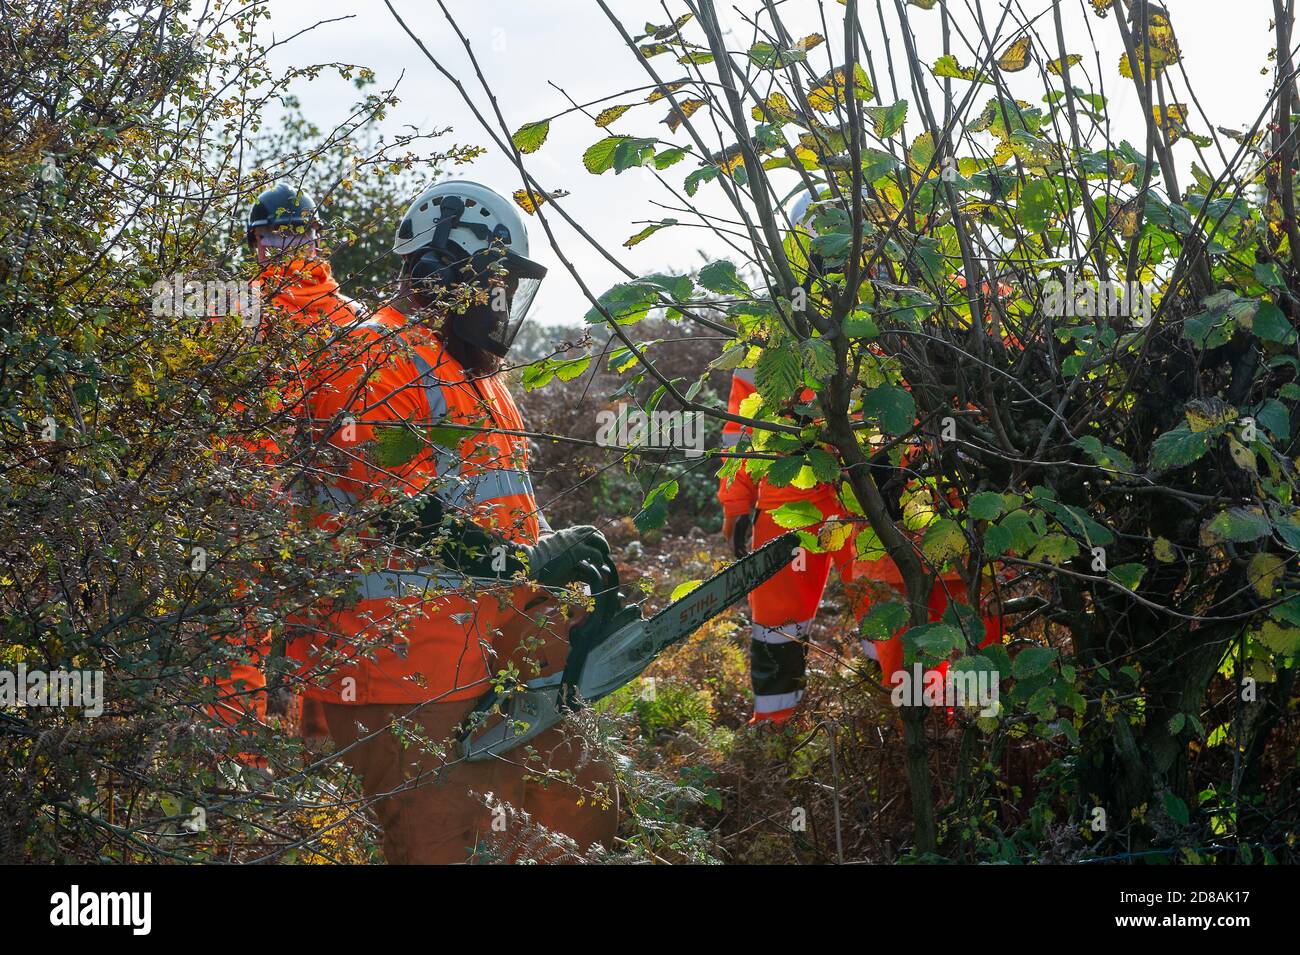 Aylesbury Vale, Buckinghamshire, UK. 28th October, 2020. HS2 tree cutters cut hedgerows to put in additional high security fencing as HS2 were cutting huge limbs off trees in Grim's Ditch this morning watched on by a distraught peaceful lone female anti HS2 protester. Environmental campaigners allege that HS2 do not have a wildlife licence allowing them to fell in this area. HS2 were not able to provide the licence. The construction of the highly controversial and over budget High Speed Rail from London to Birmingham puts 108 ancient woodlands, 33 SSSIs and 693 wildlife sites at risk. Credit: Stock Photo